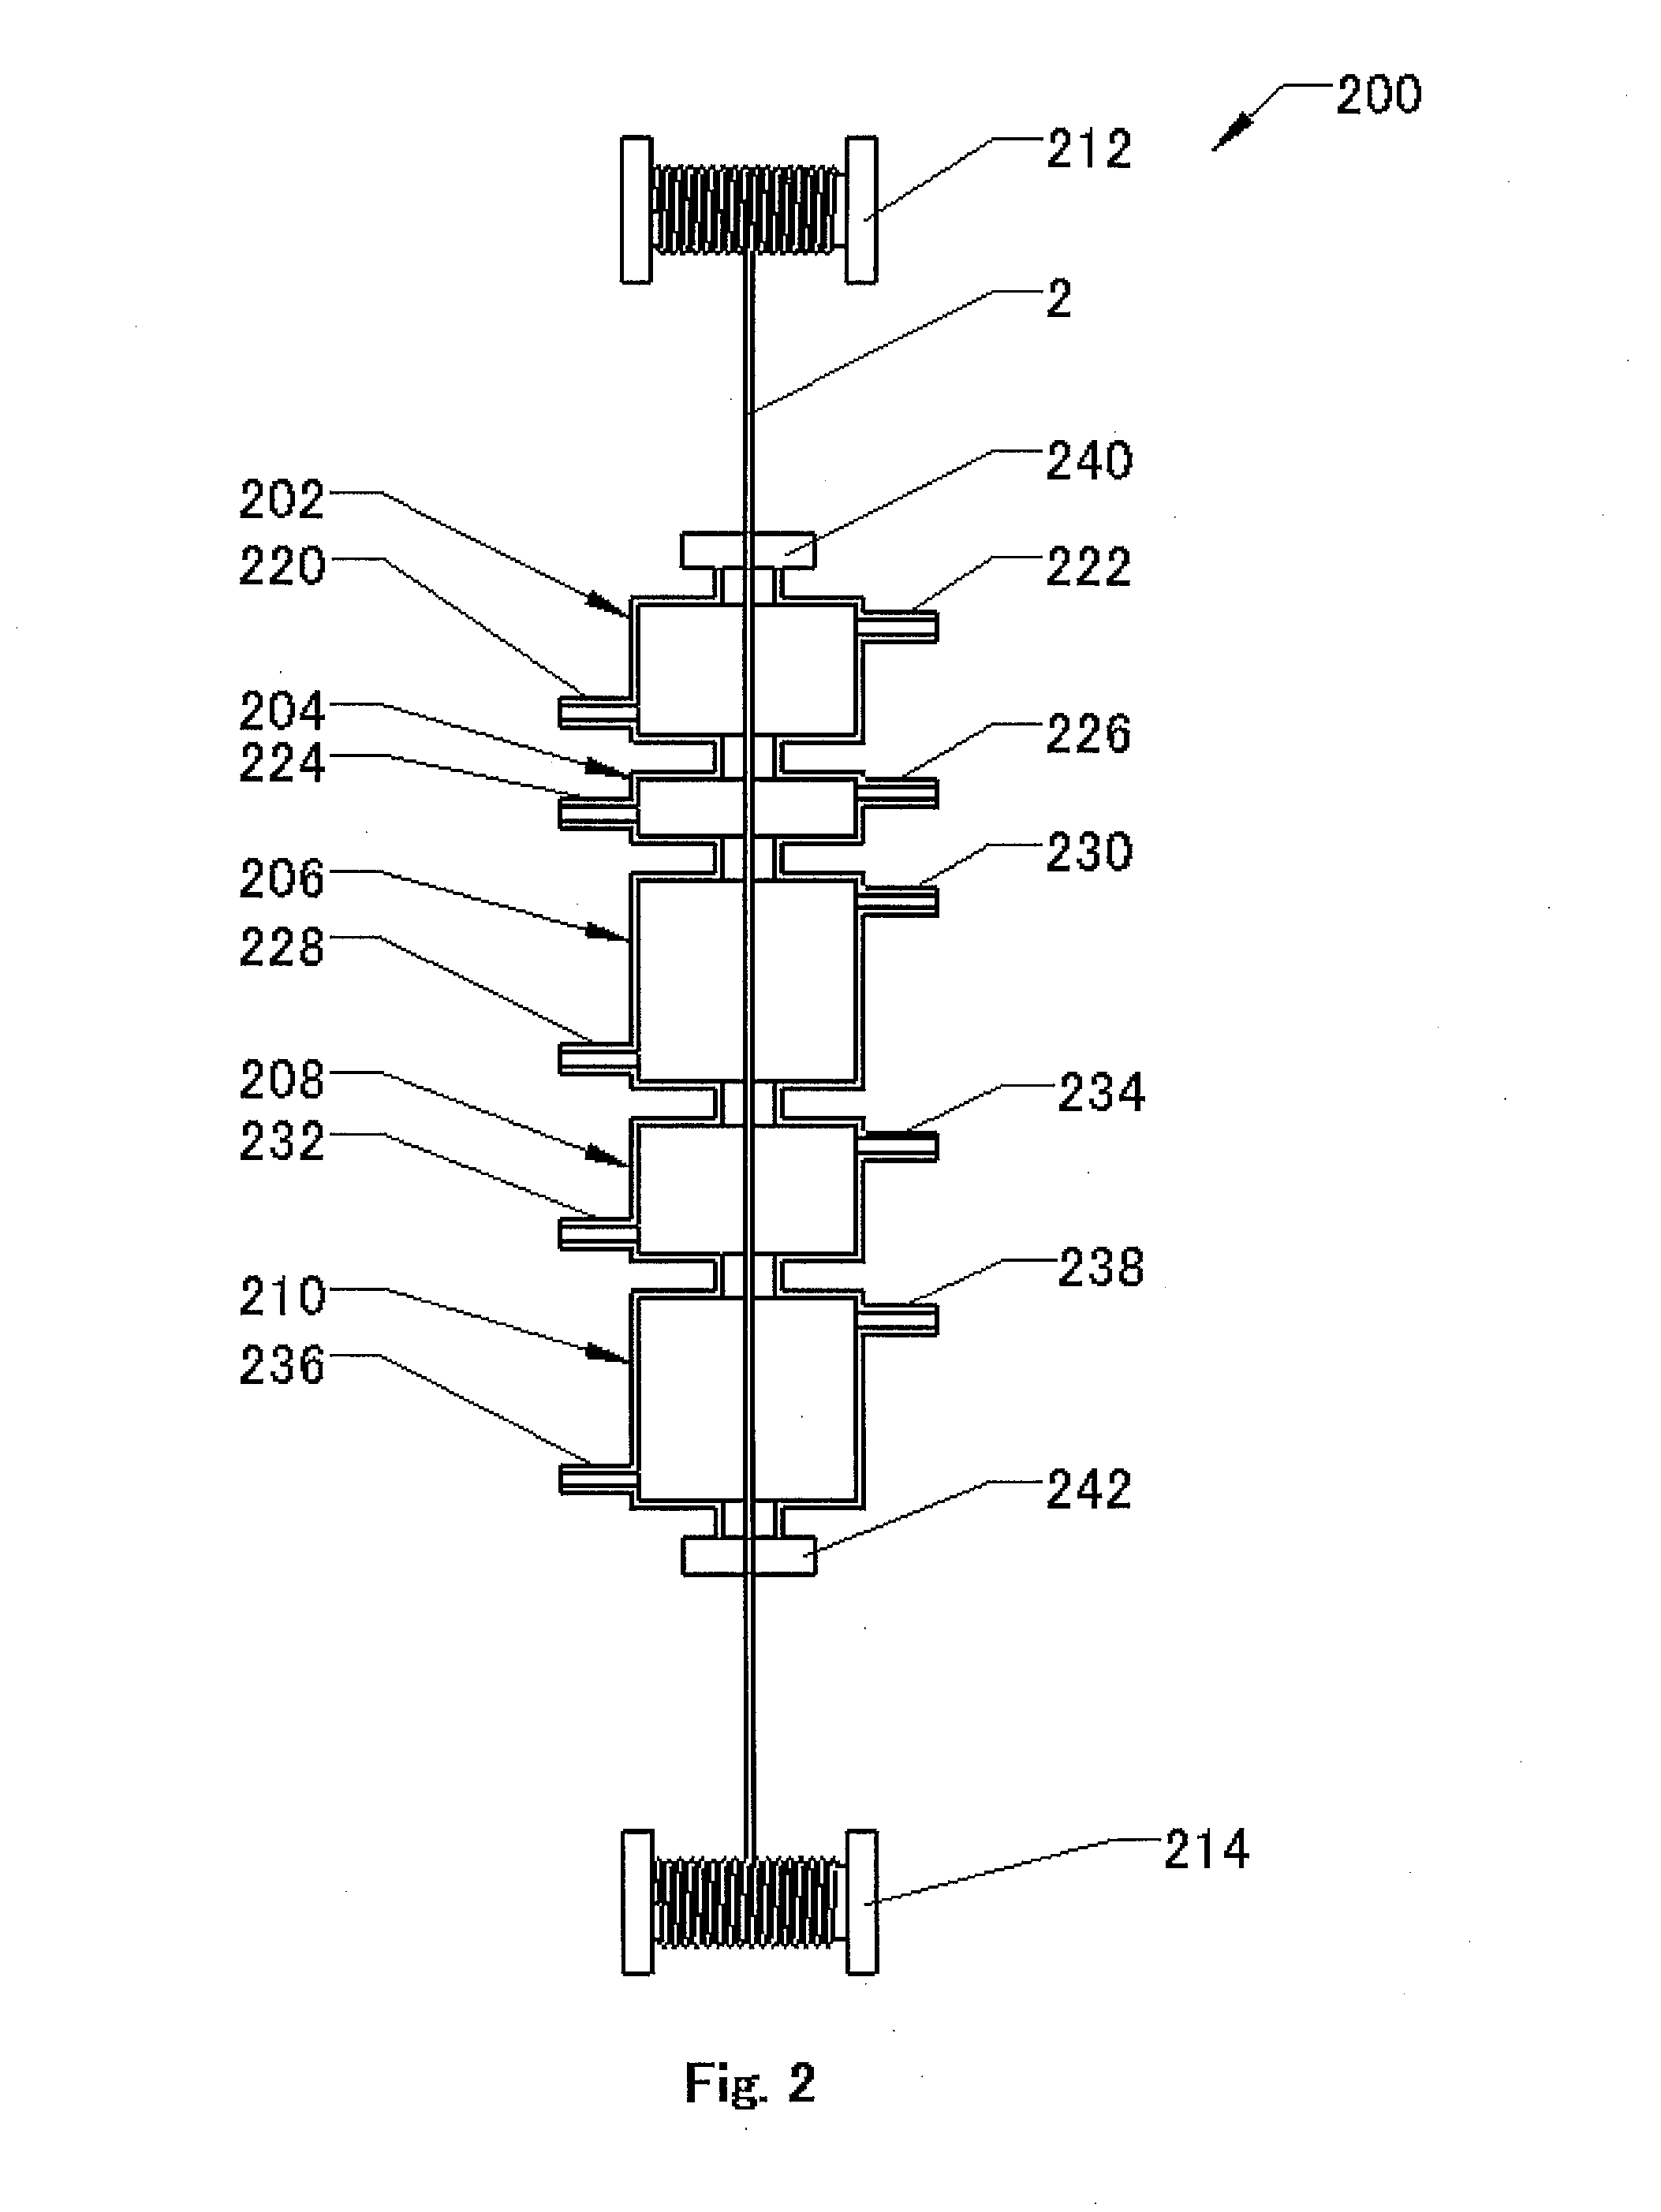 Li-ion battery and battery active components on metal wire